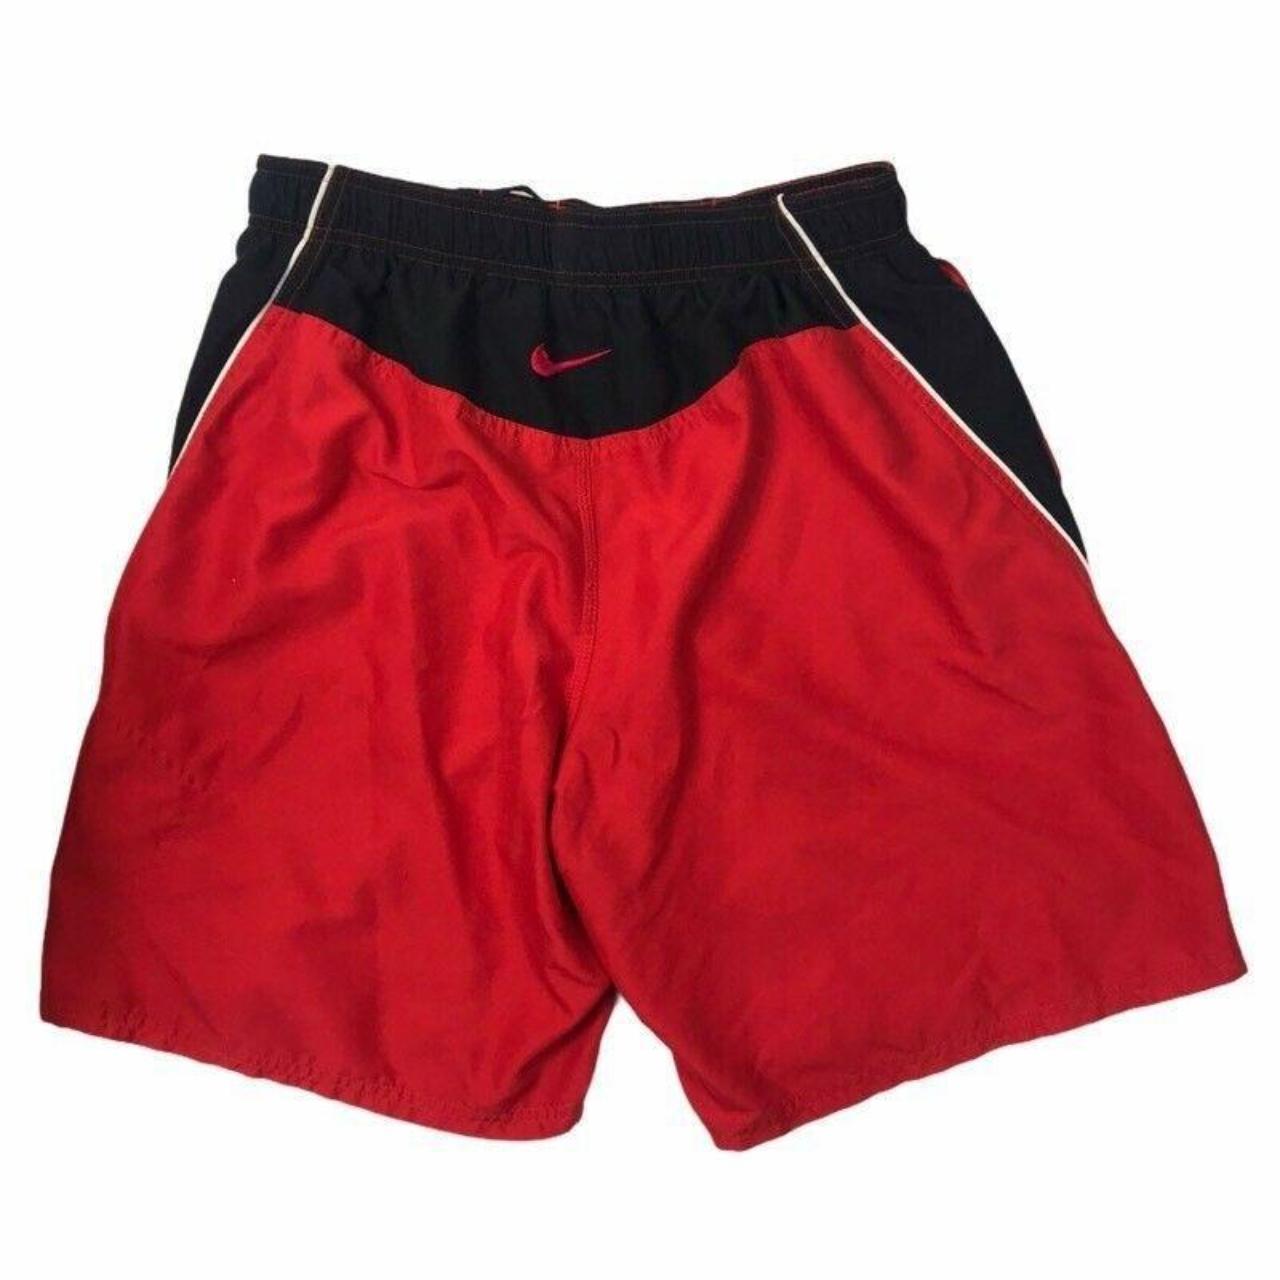 Nike Men's Red and Black Swimsuit-one-piece (2)